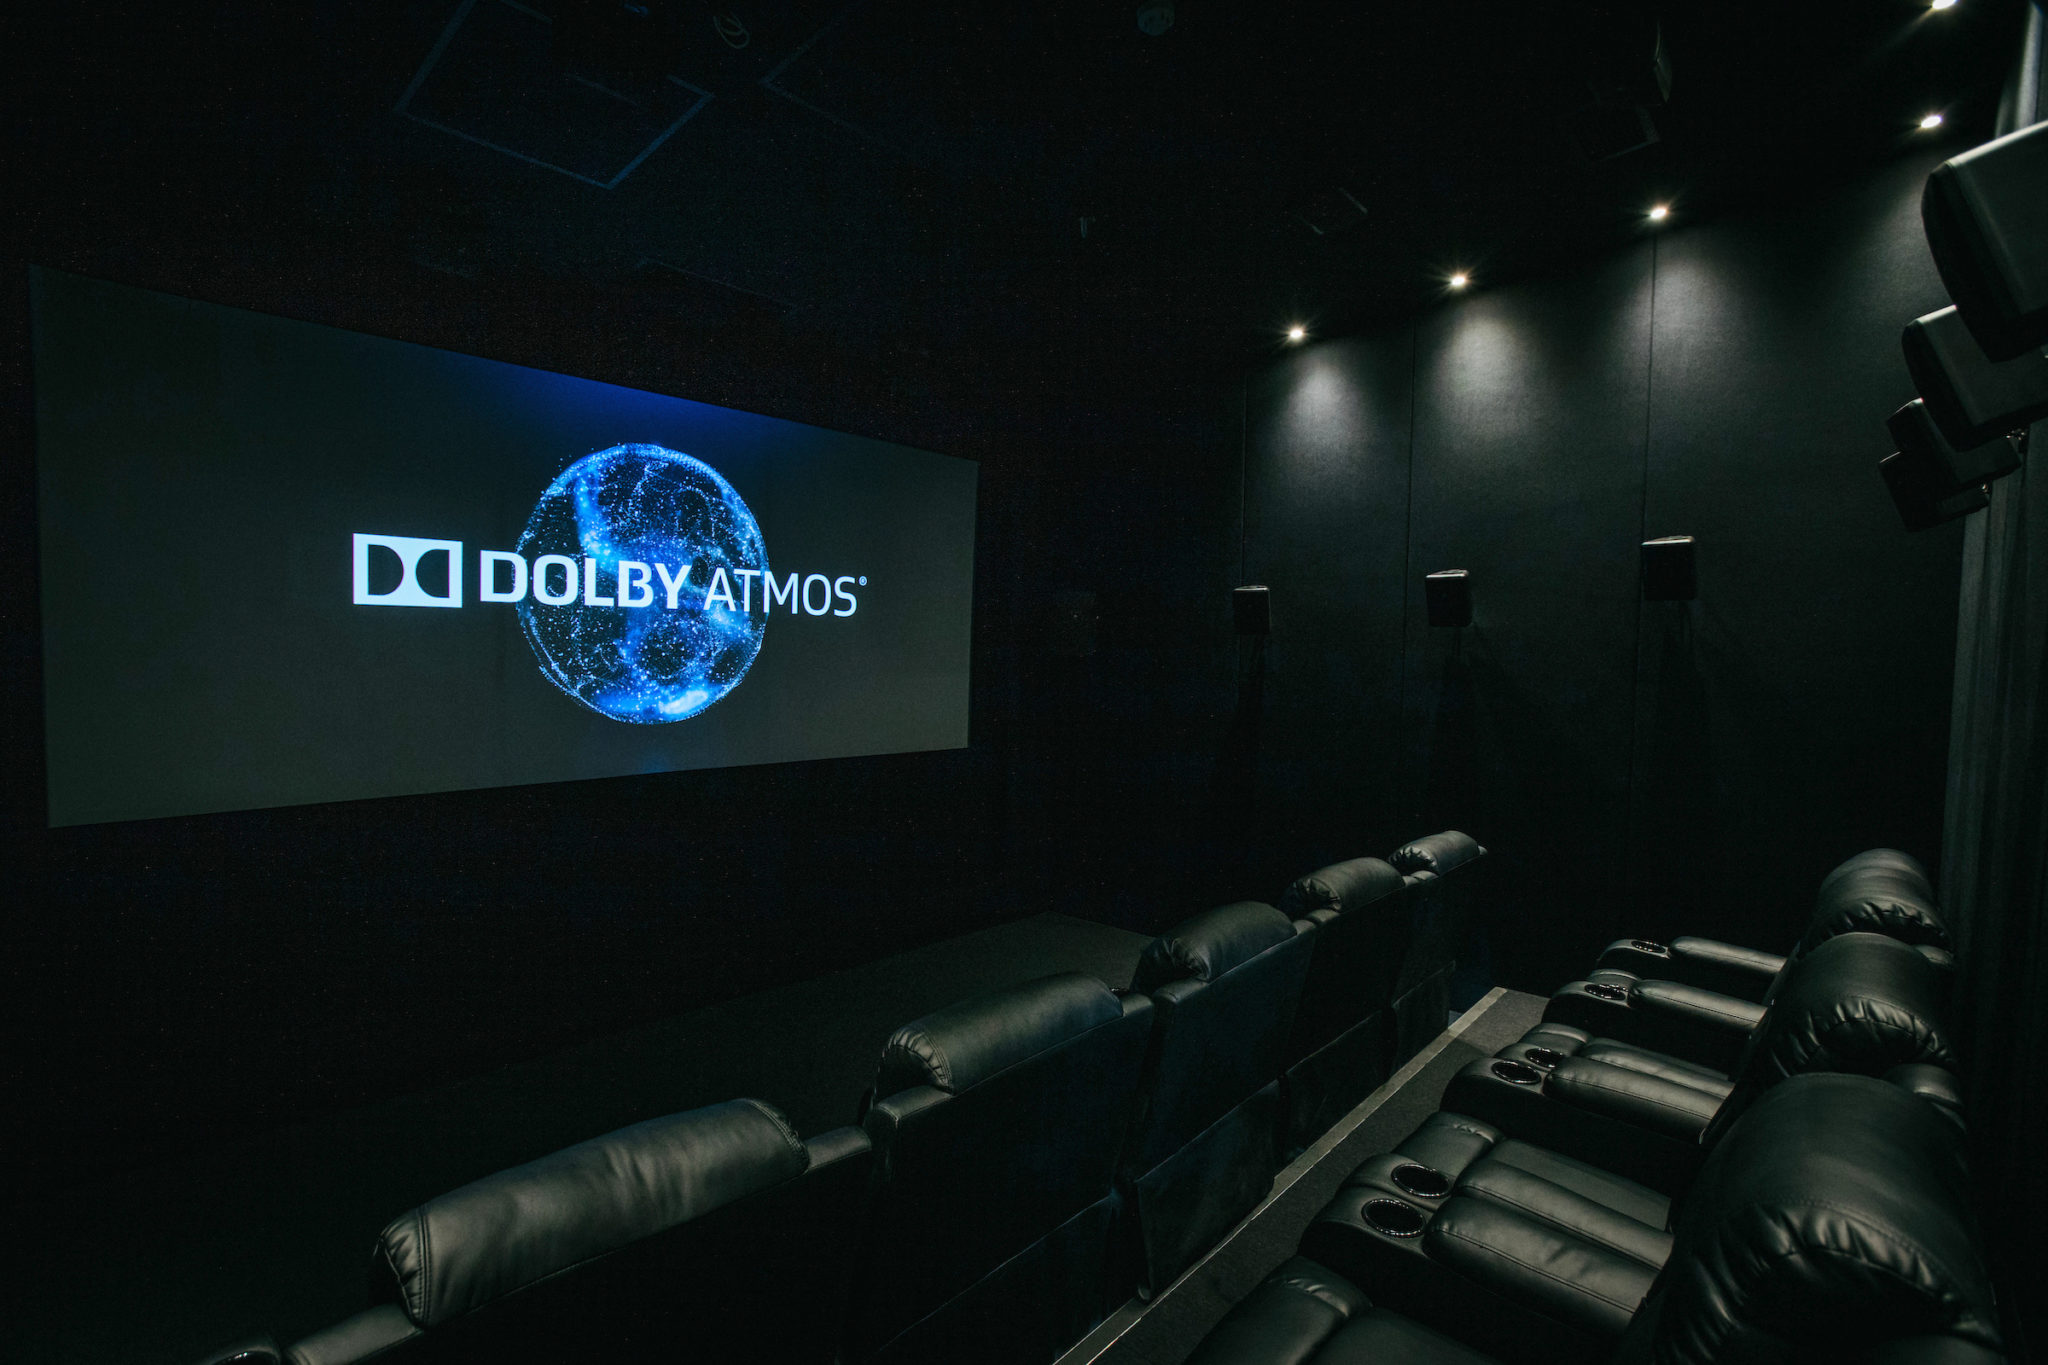 A new 4K screening room at Visual Data Media Services in West London